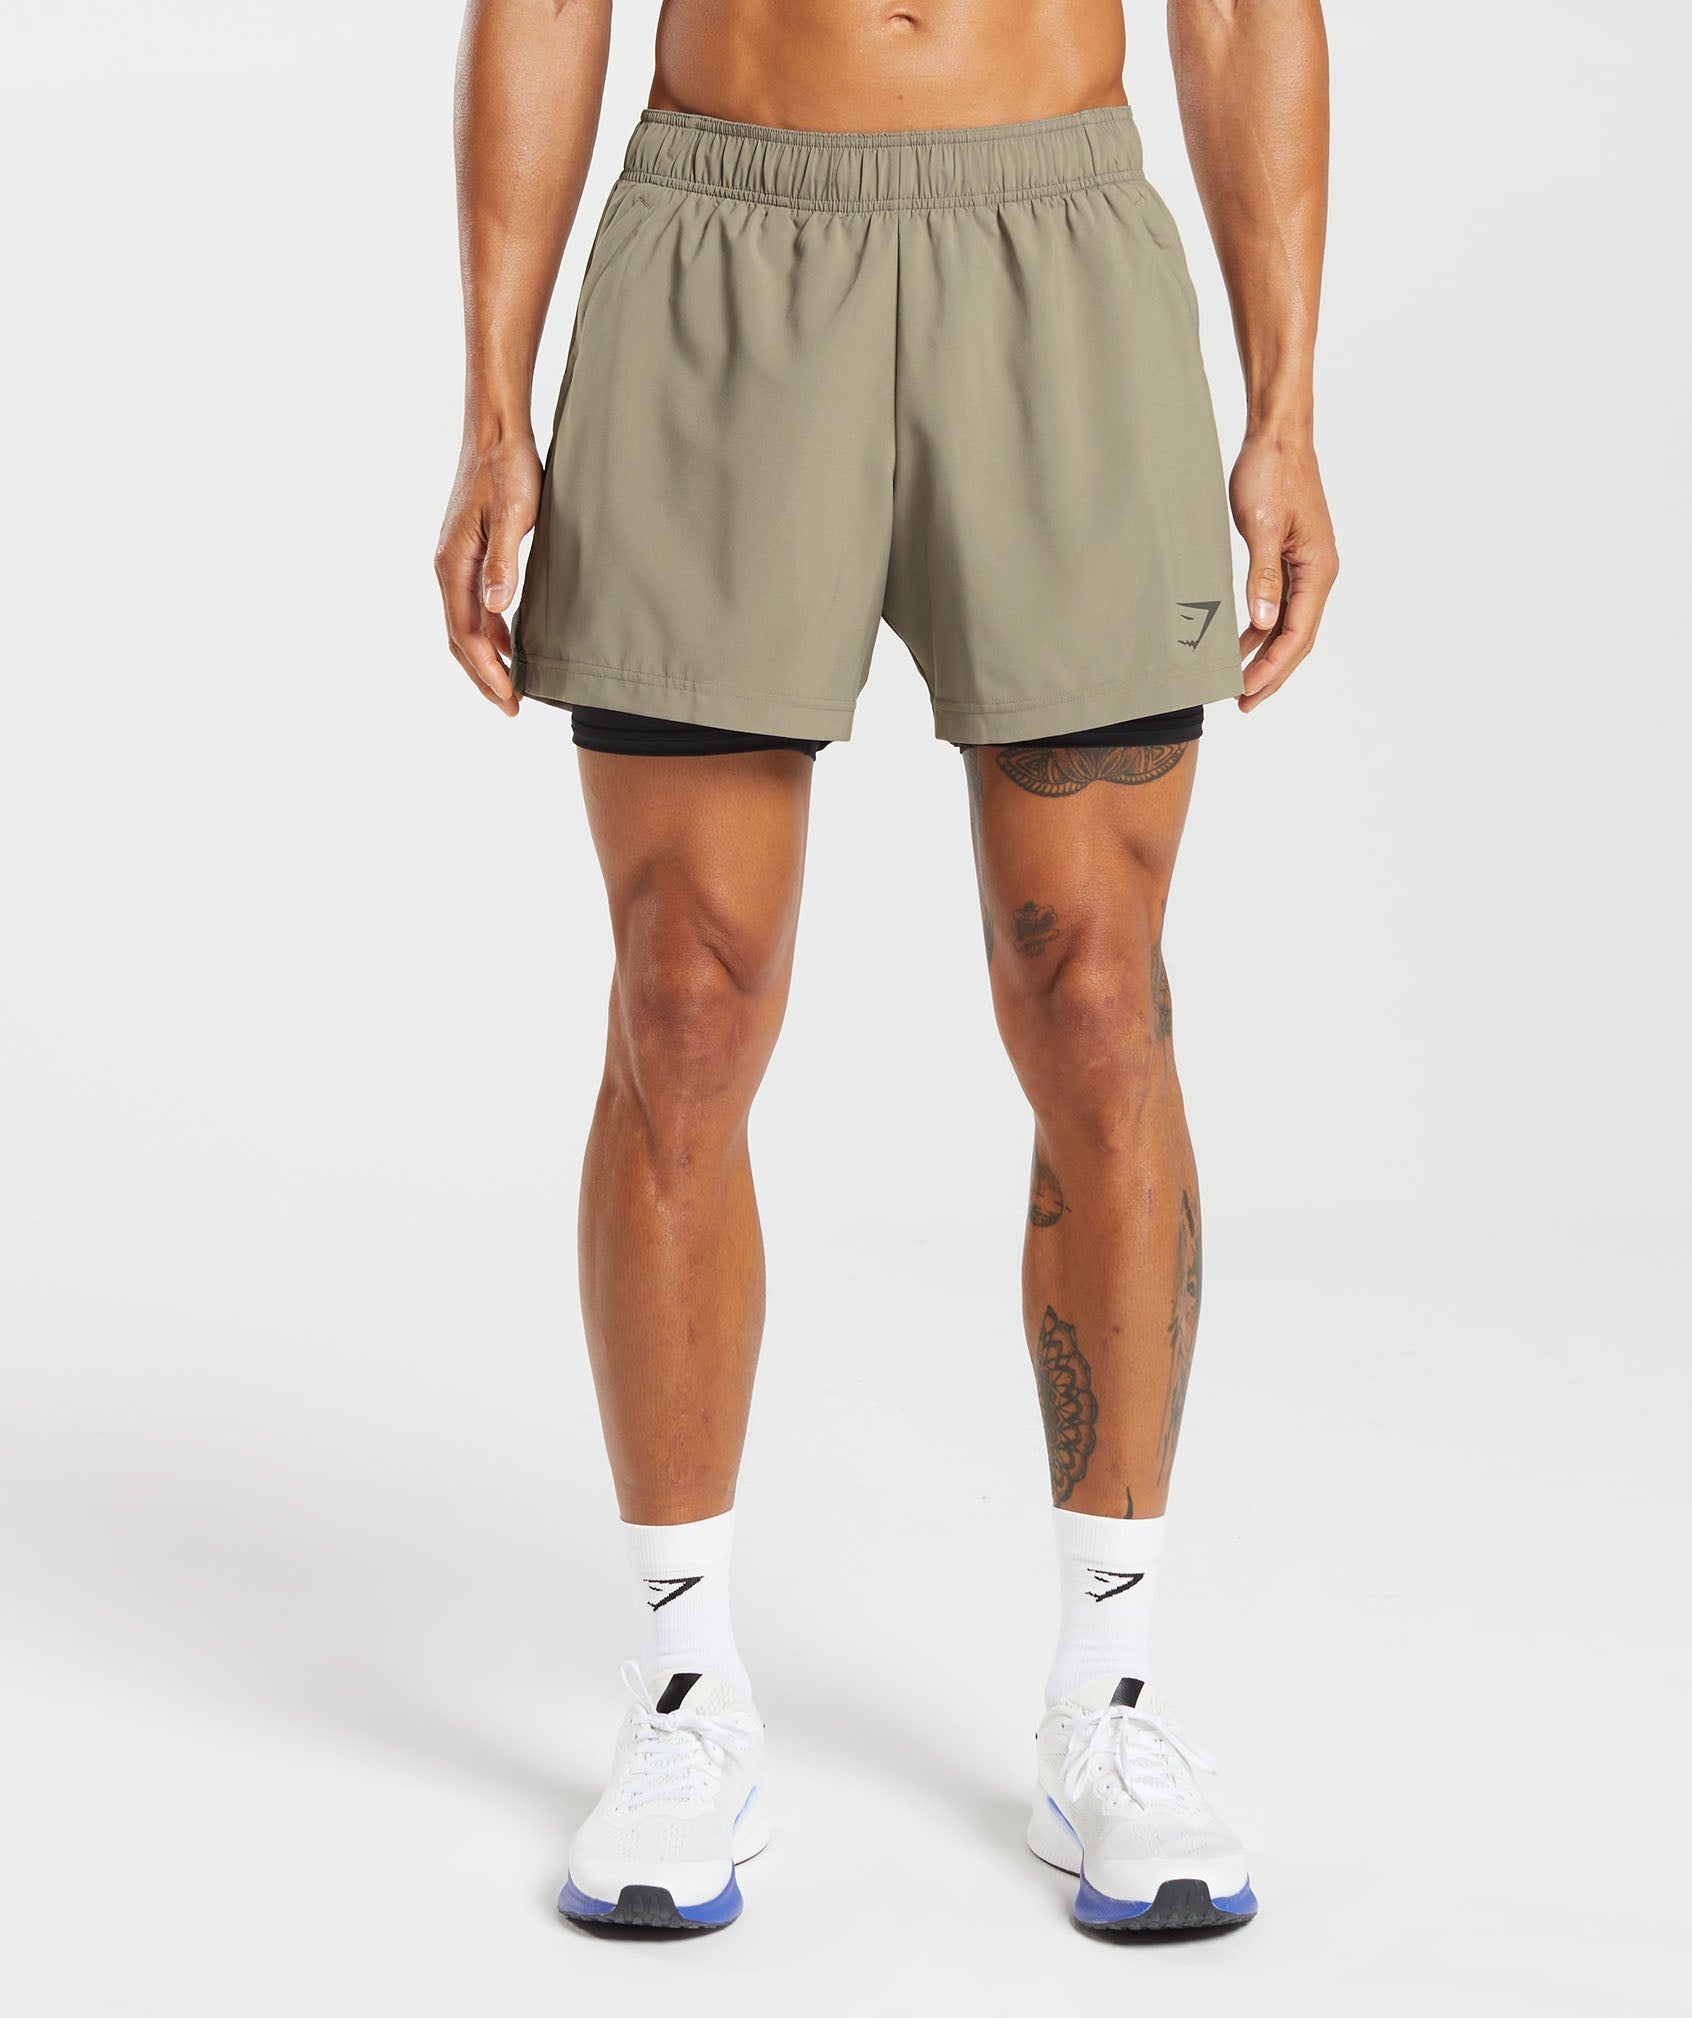 Elevate 4 2-in-1 Short - Shorts